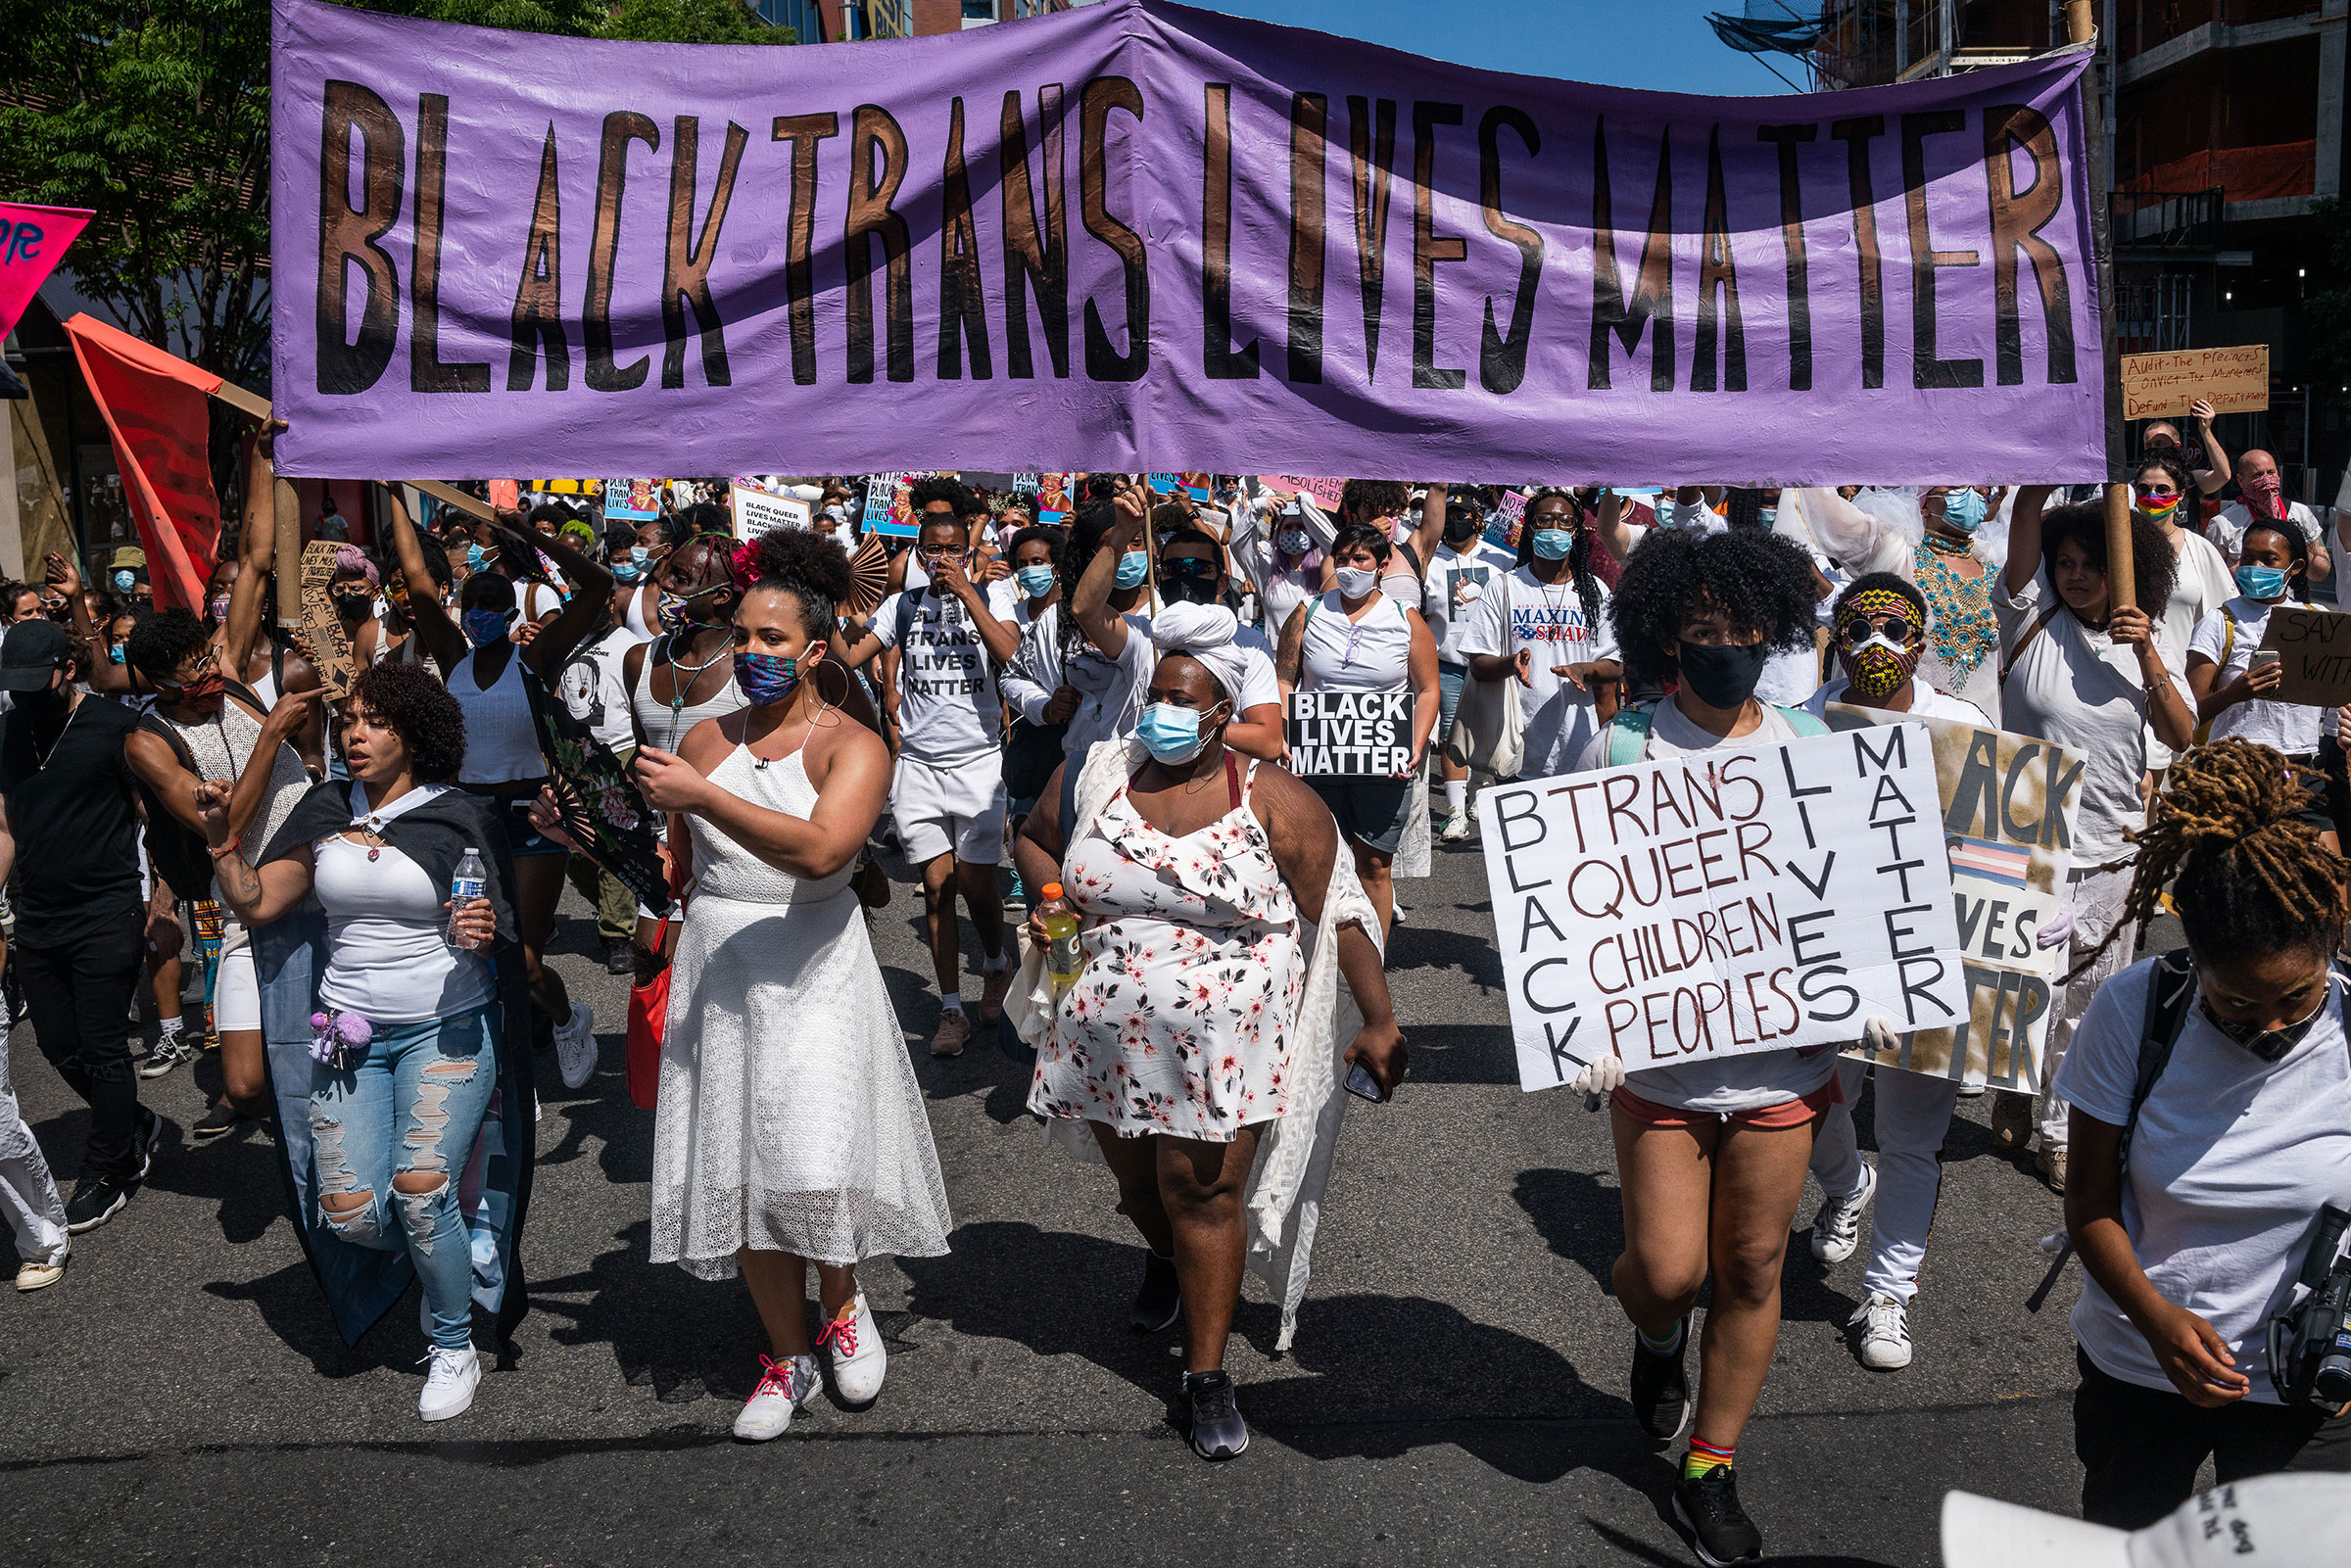 Demonstrators carry a banner reading "Black Trans Lives Matter" during a march in New York, on June 14, 2020. (Demetrius Freeman—The New York Times/Redux)